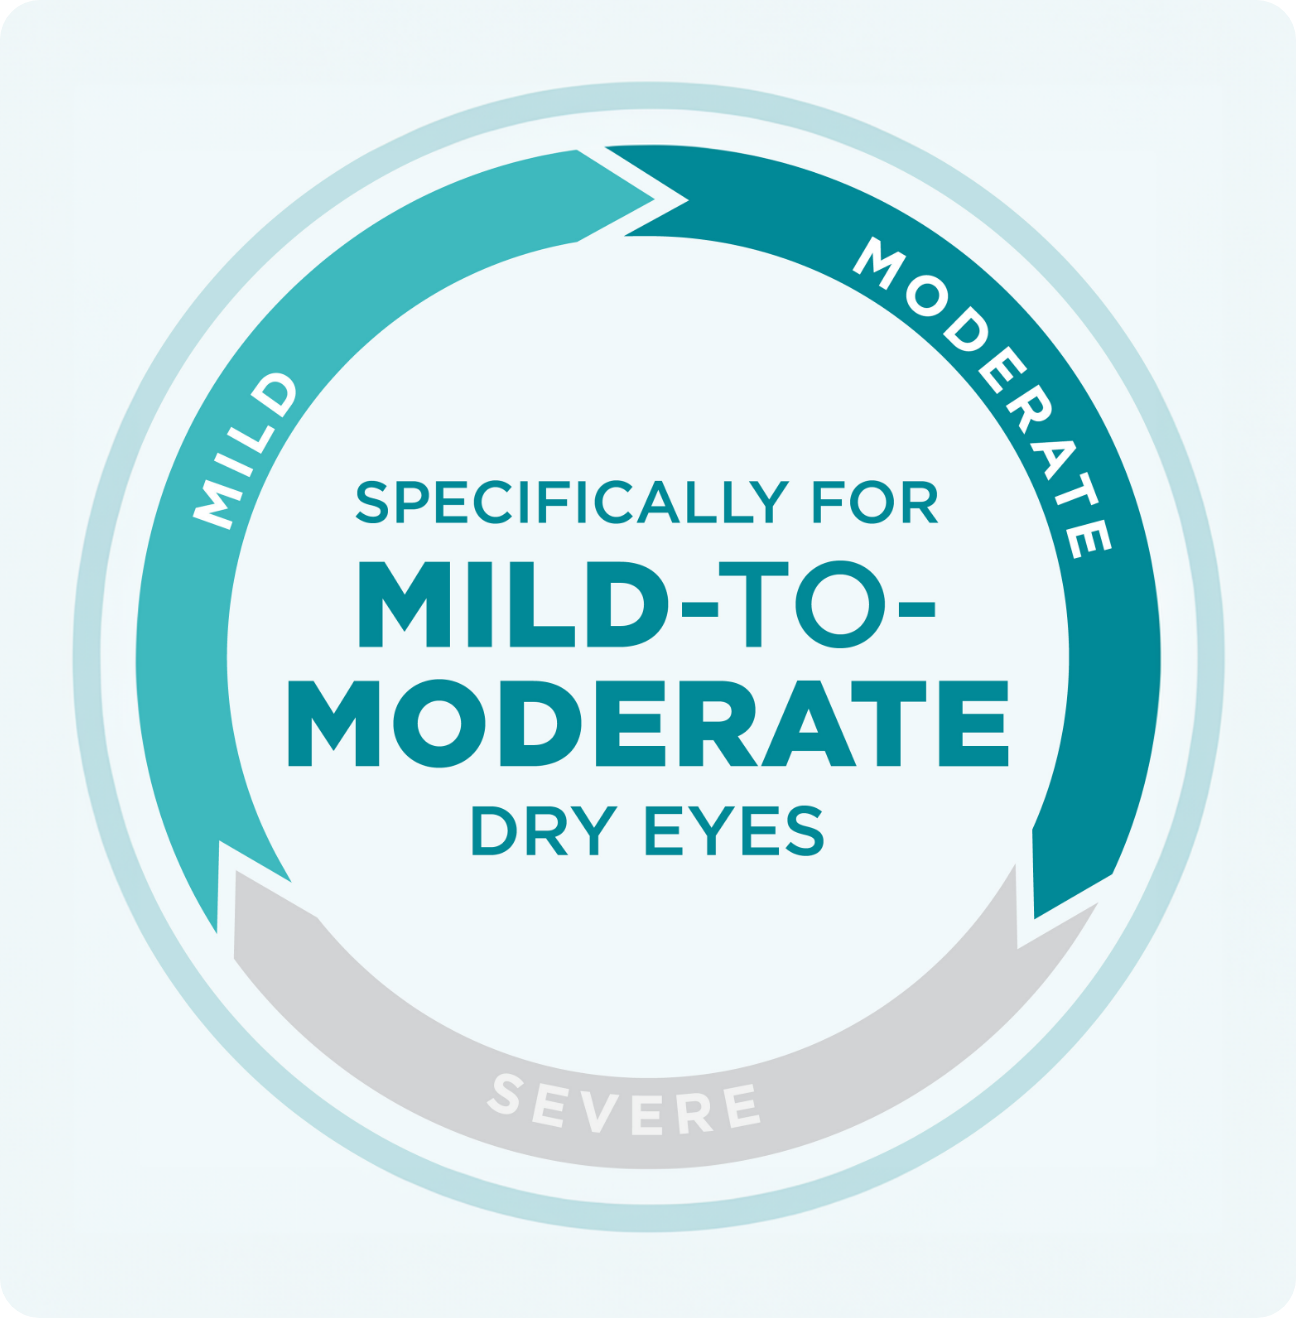 Icon indicating Blink Tears is specifically for mild to moderate dry eyes